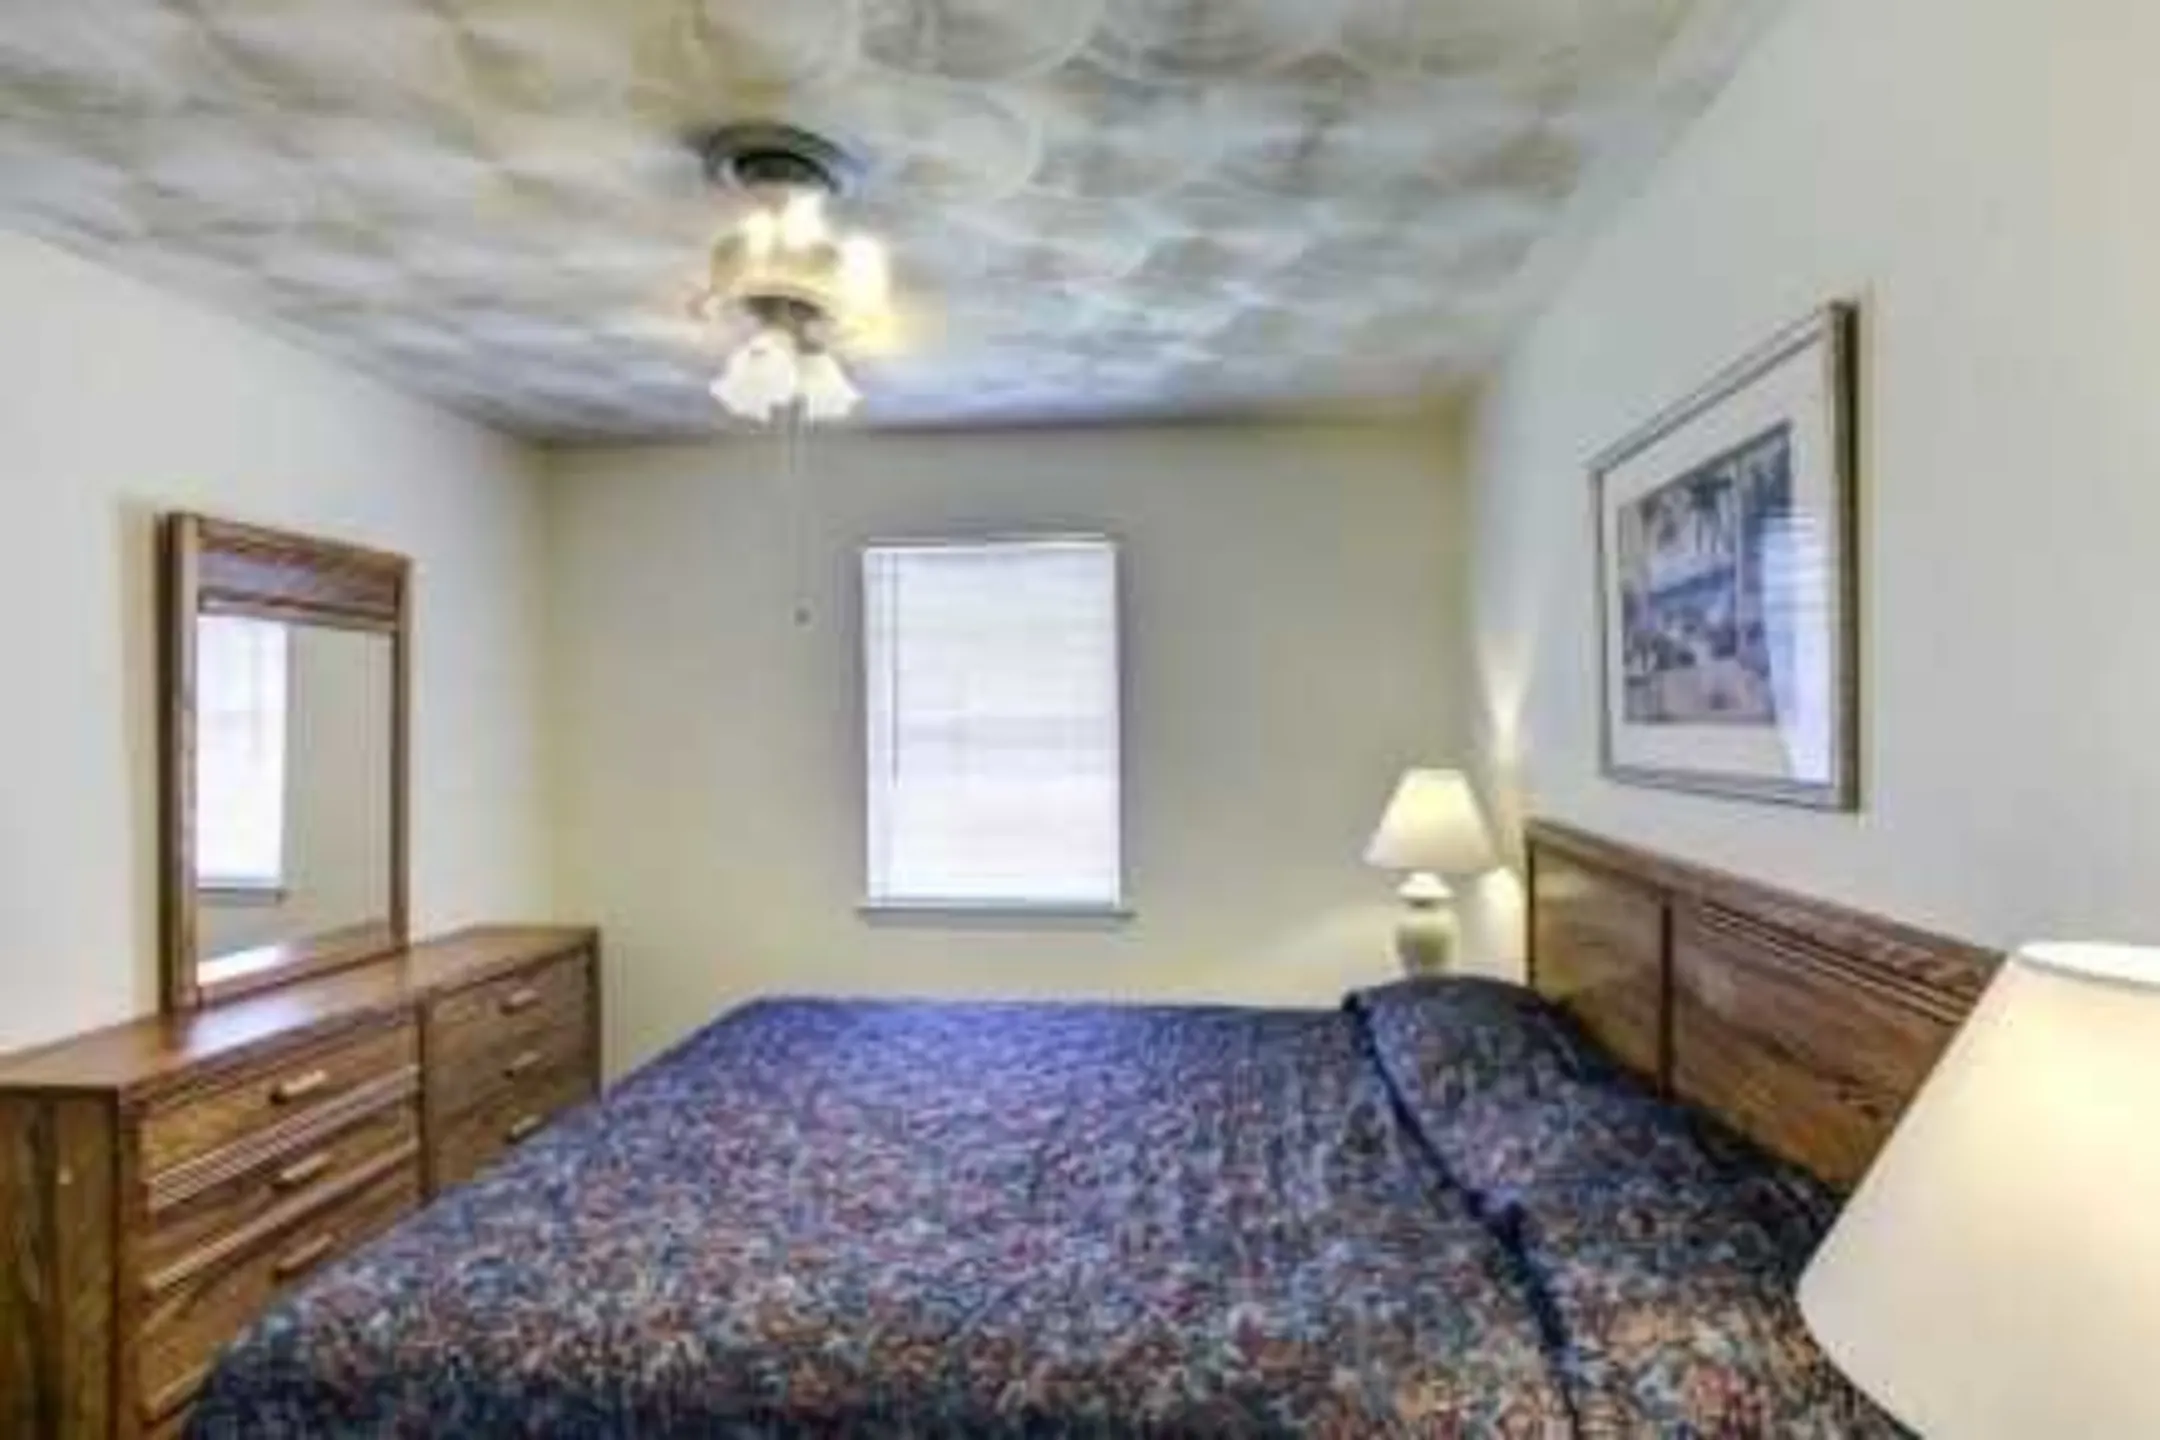 Bedroom - Oakwood Crest Furnished Apartments - Euless, TX